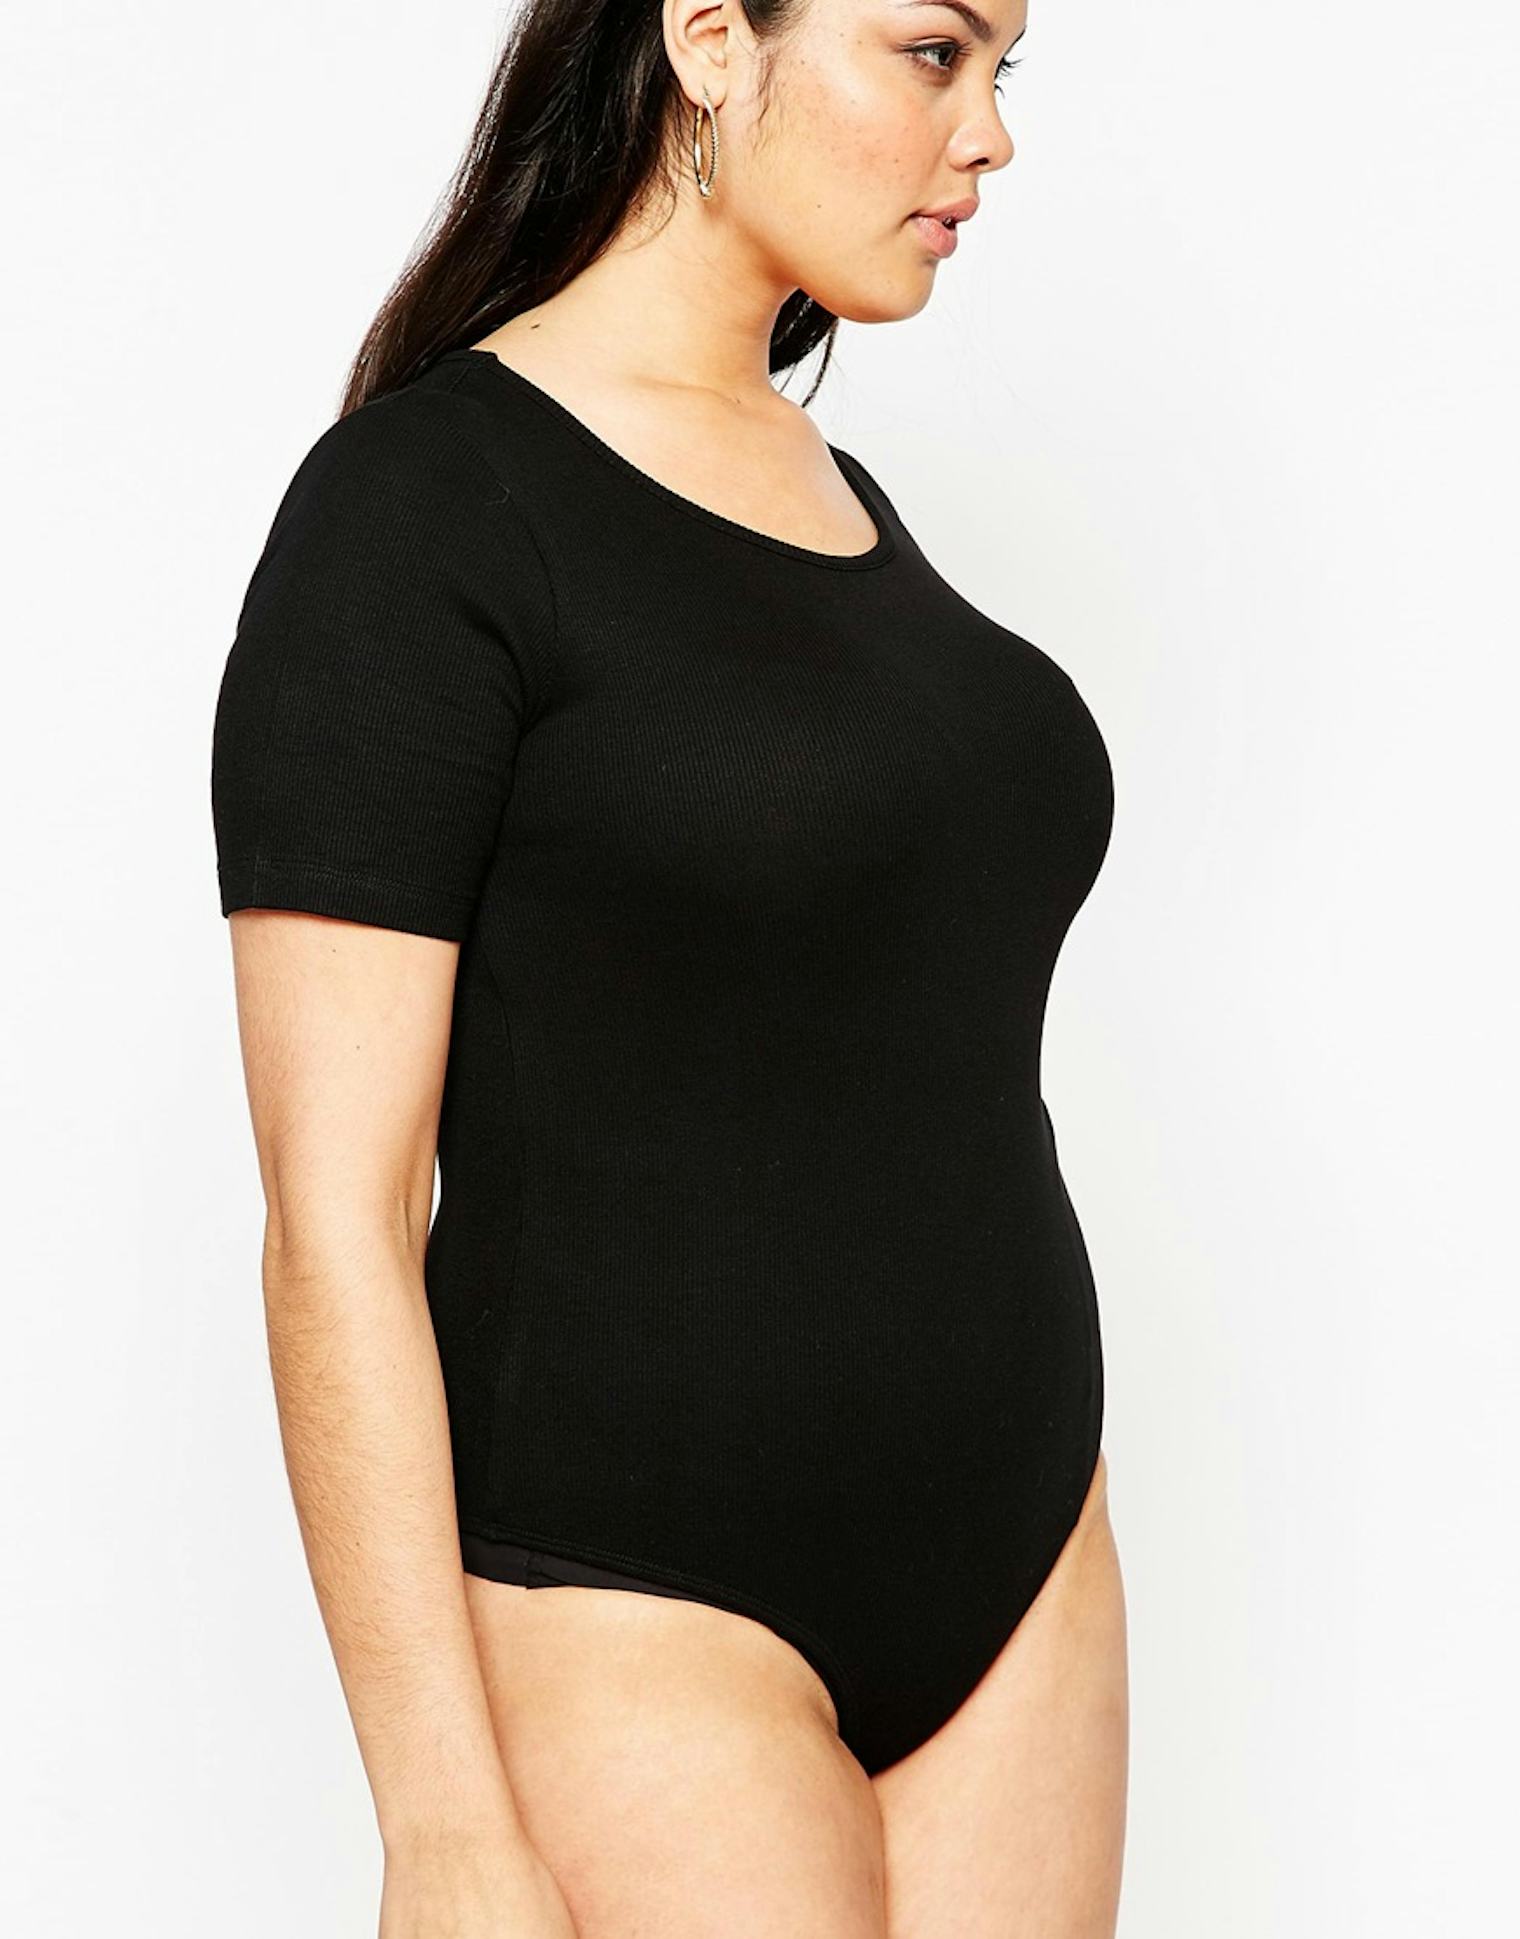 33 Plus Size Bodysuits That'll Ensure Layering Perfection In Any Season â PHOTOS